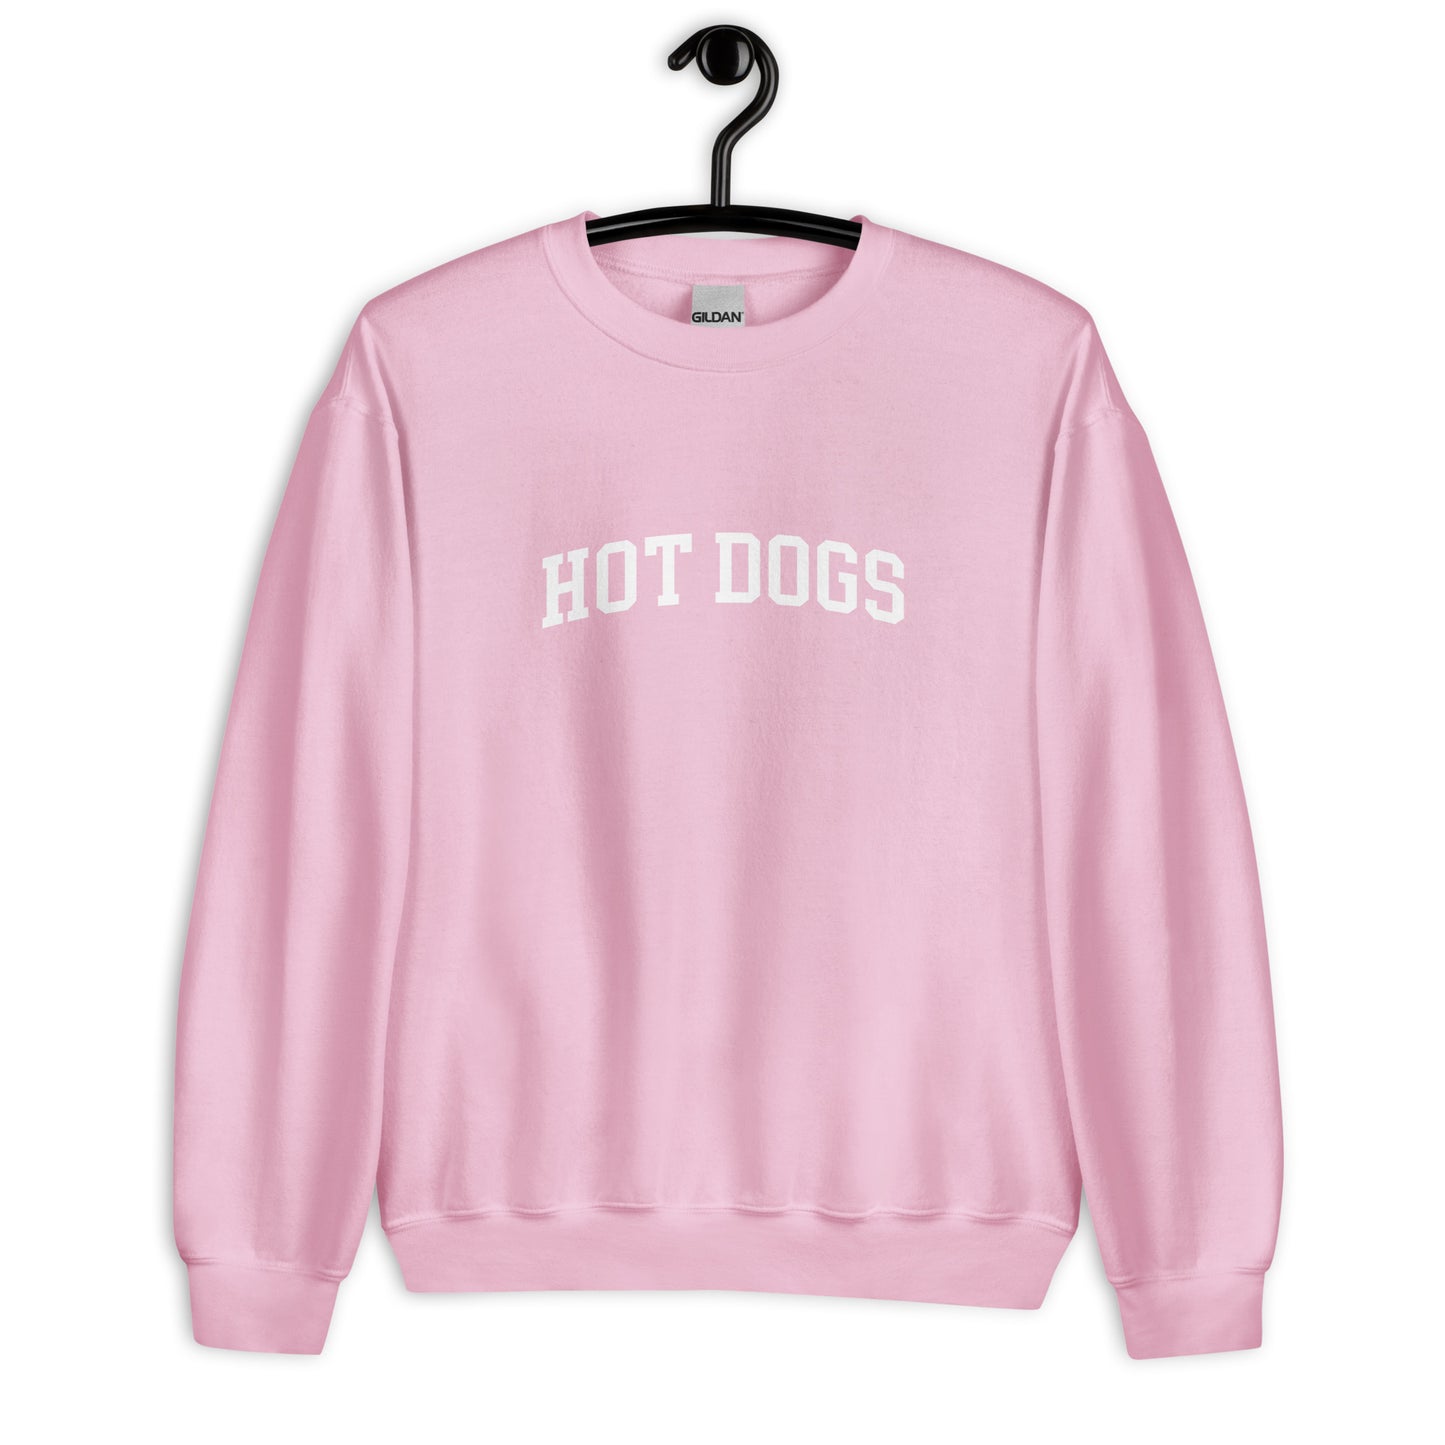 Hot Dogs Sweatshirt - Arched Font